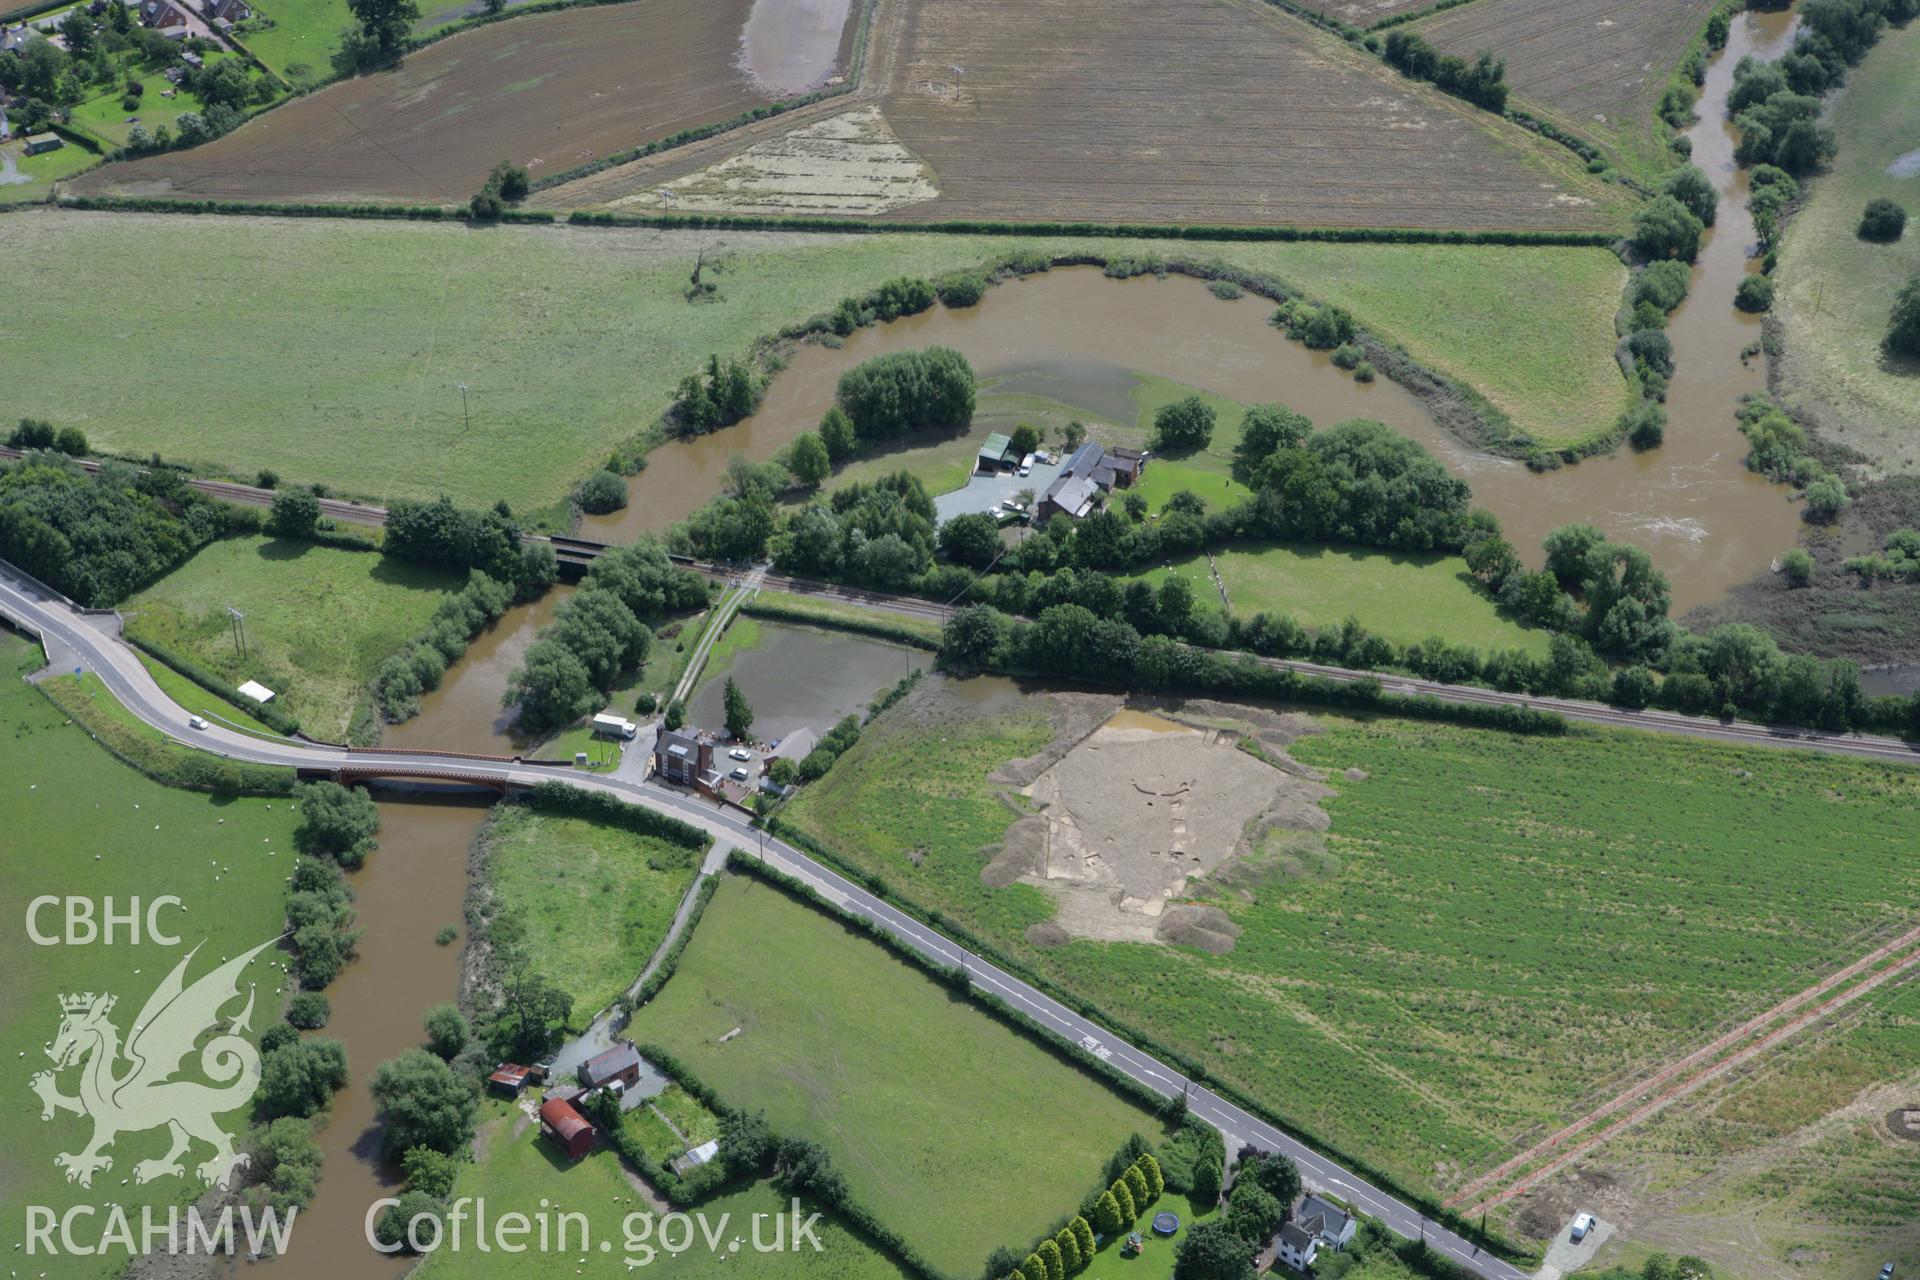 RCAHMW colour oblique aerial photograph of excavations around Buttington. Taken on 24 July 2007 by Toby Driver